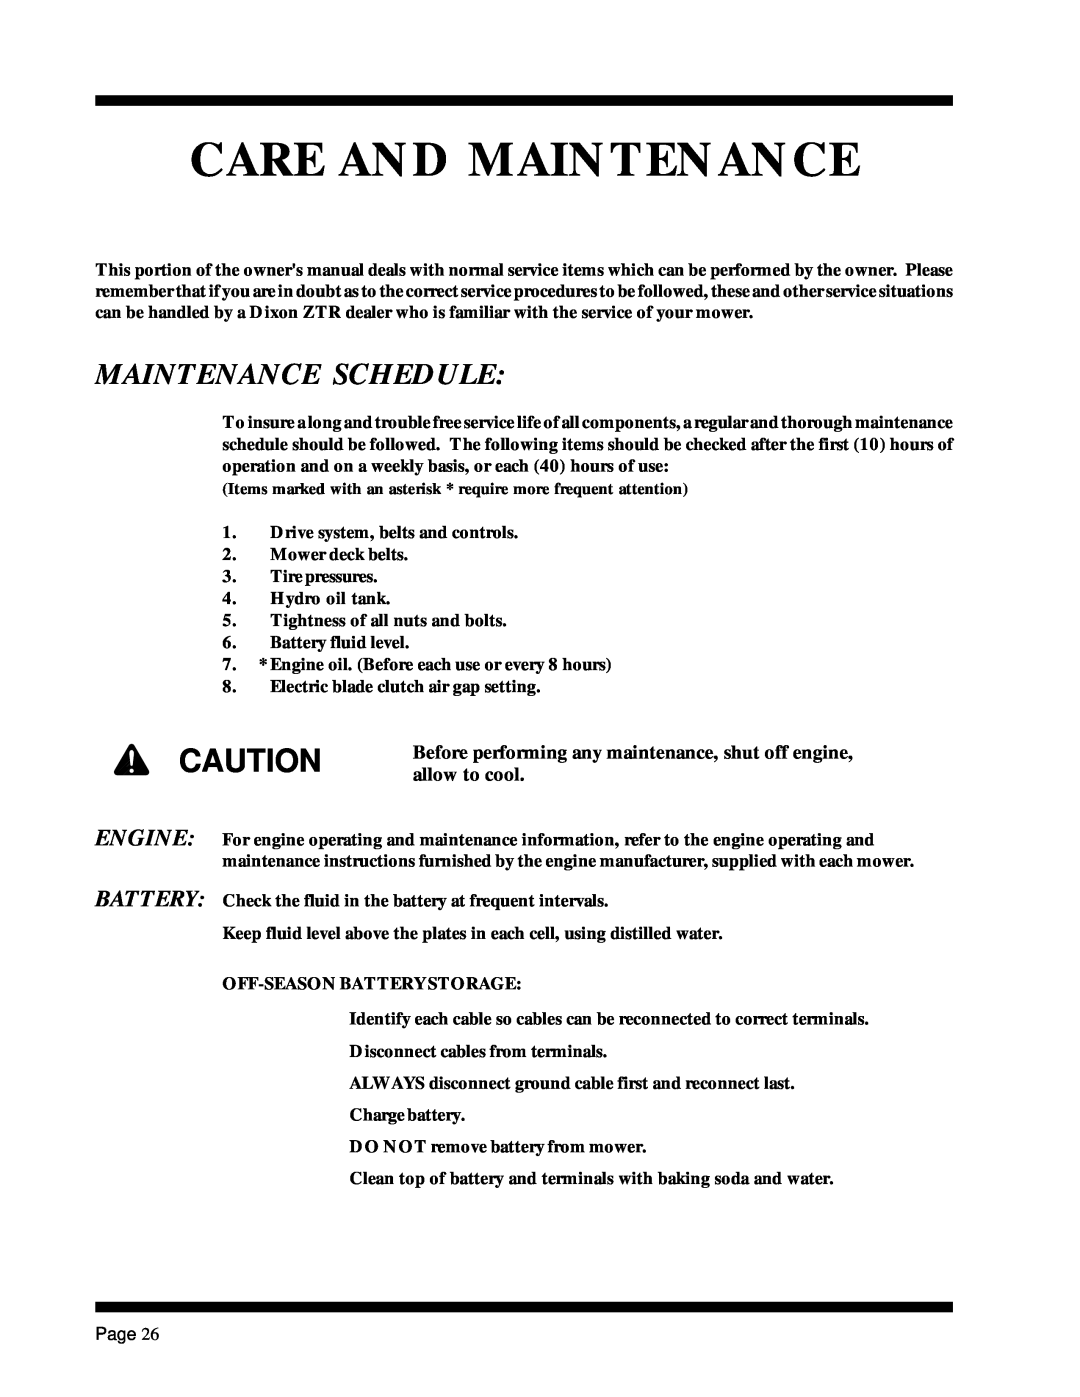 Dixon ZTR 5017Twin manual Care And Maintenance, Maintenance Schedule, Engine Battery 